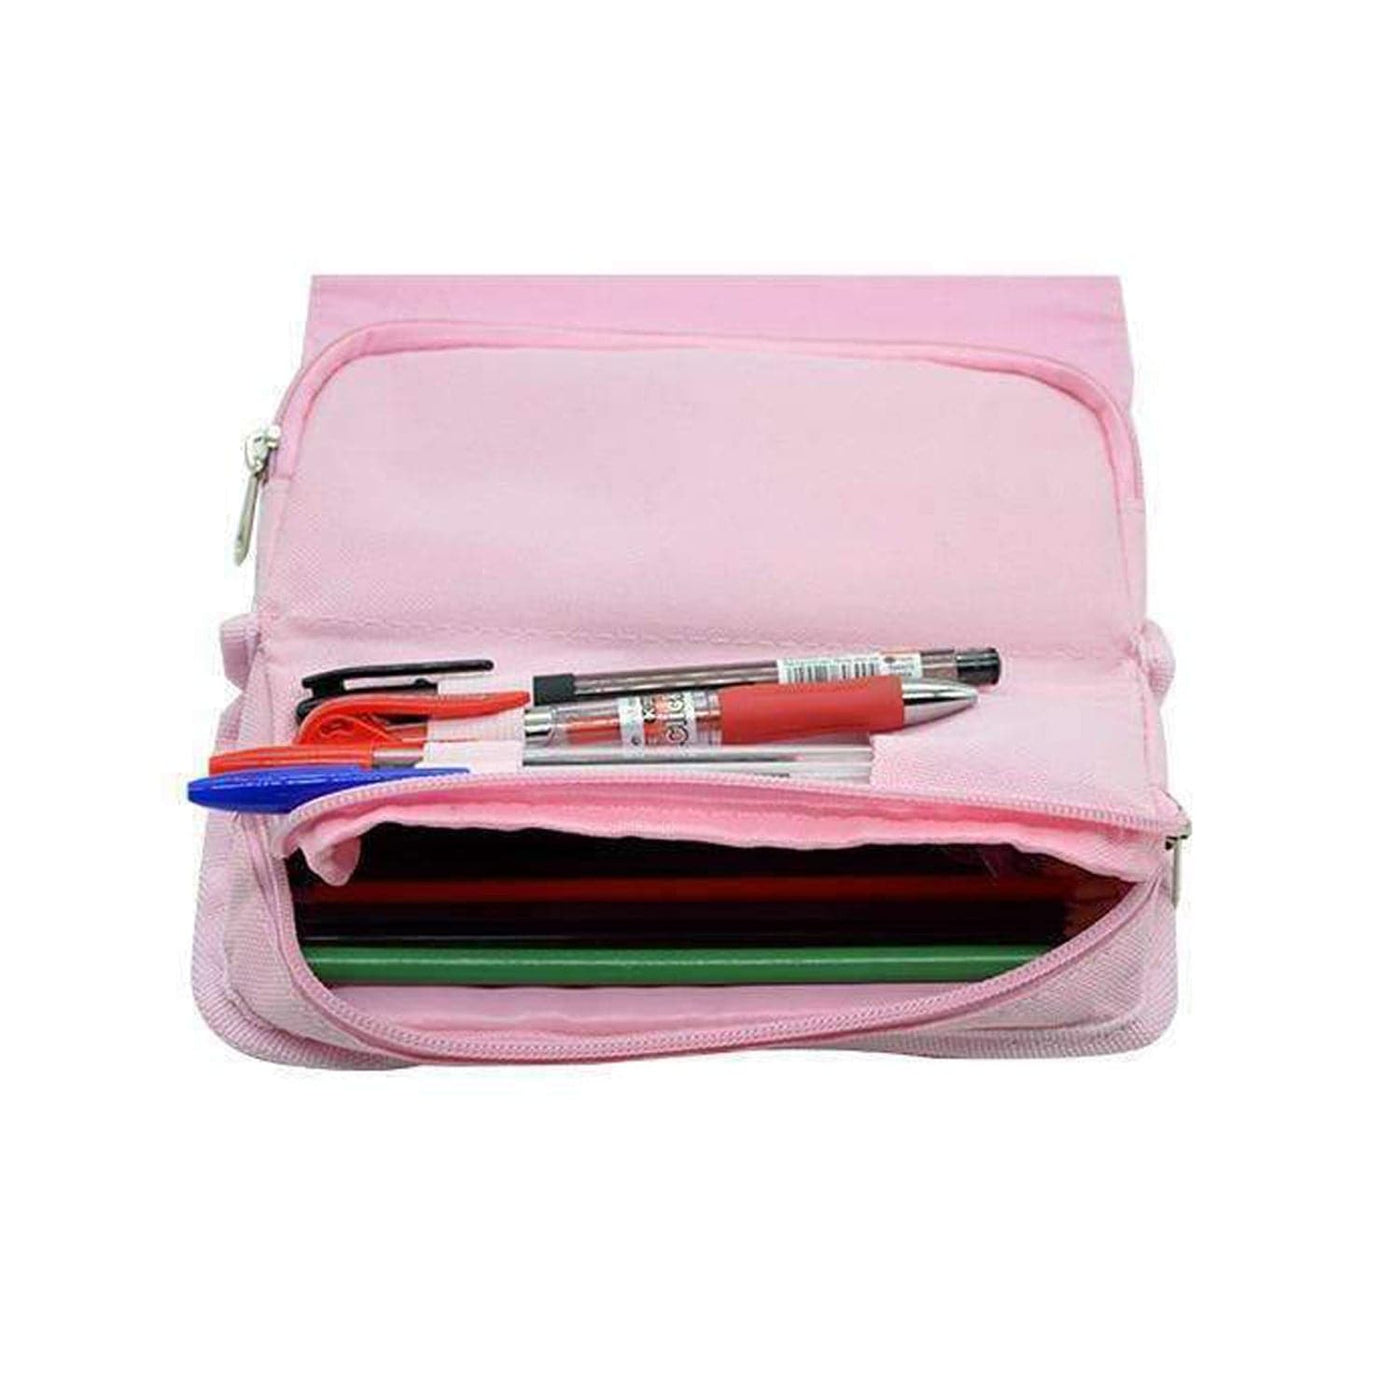 You Want A Love That Consumes You - Vampire Diaries Pencil Case